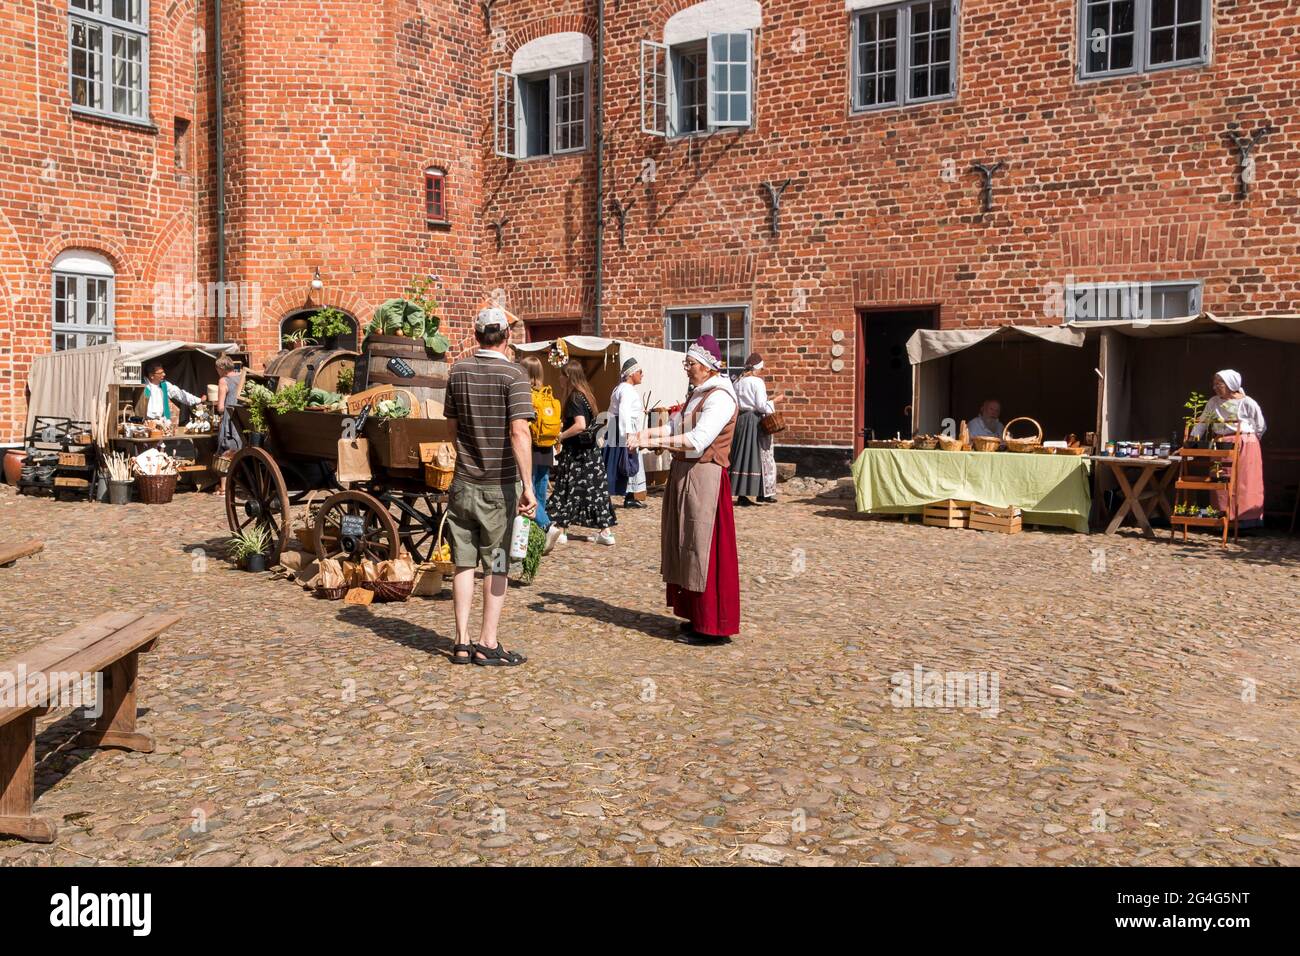 Auning, Denmark - 19 June 2021: 18th century day at Gammel Estrup Castle, People are dressed as in the 18th century and everything passes as then. Bea Stock Photo